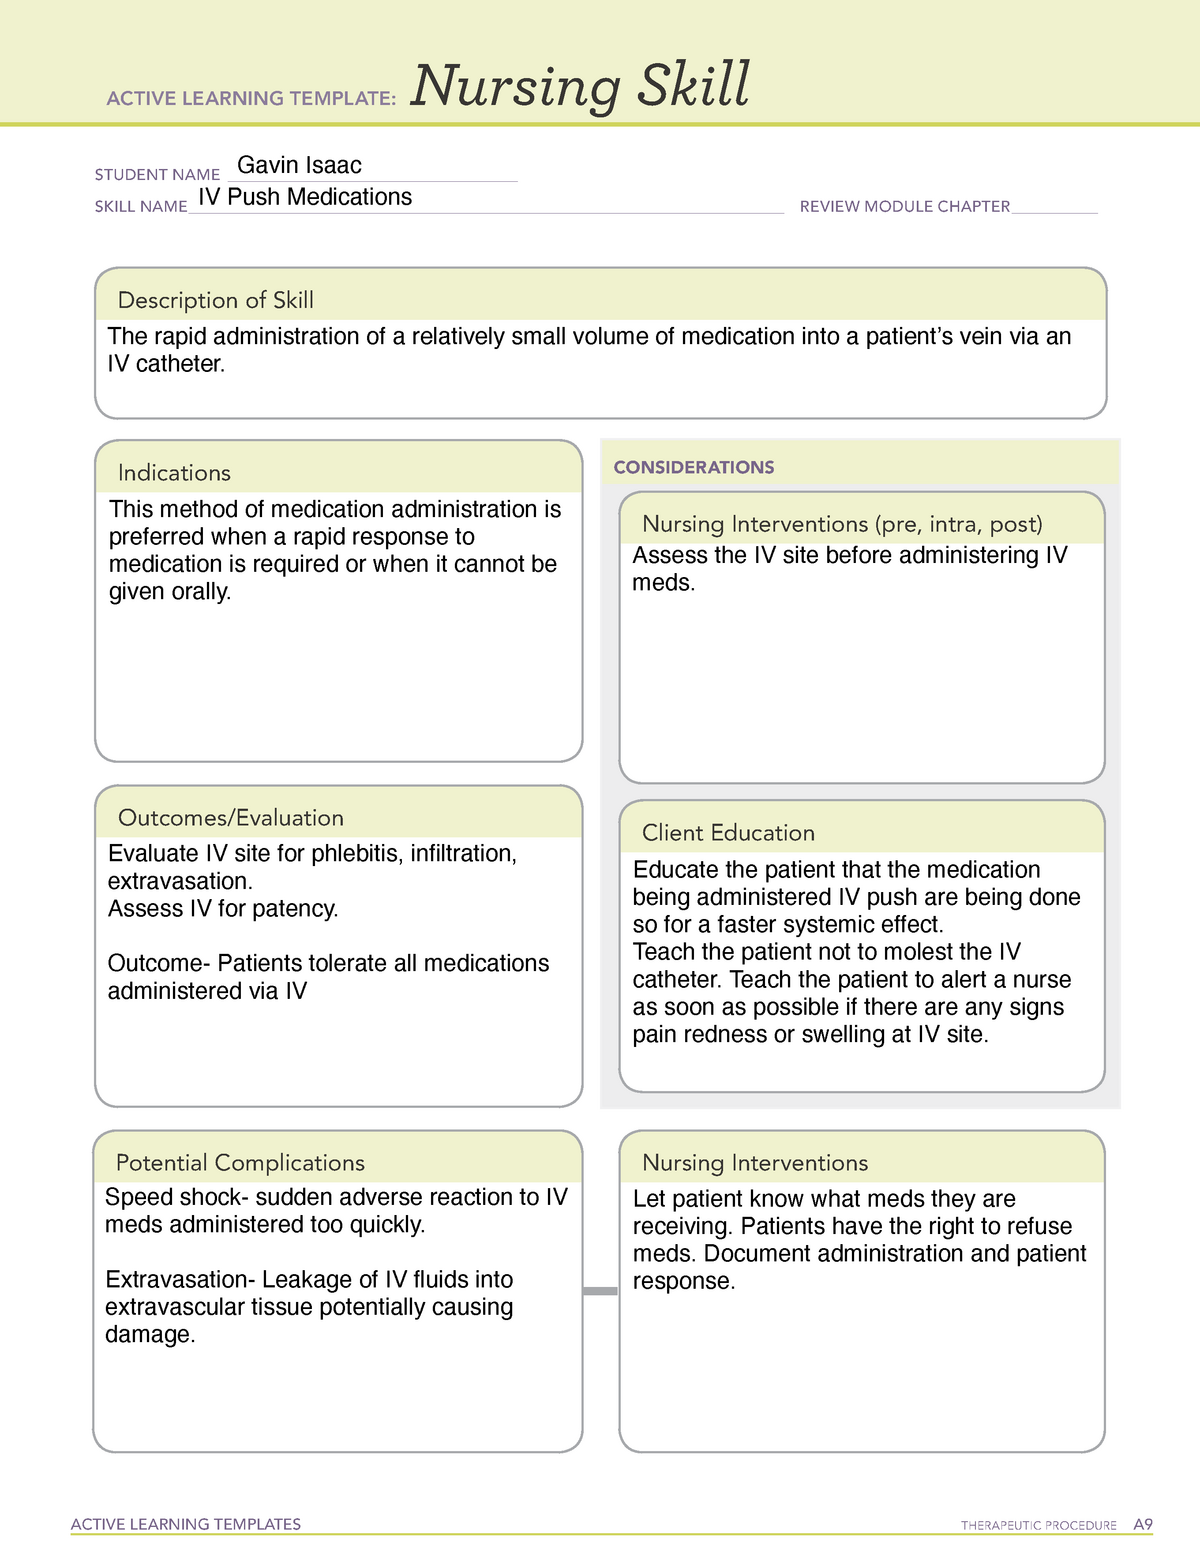 Skill IVPush Meds Active Learning Template ACTIVE LEARNING